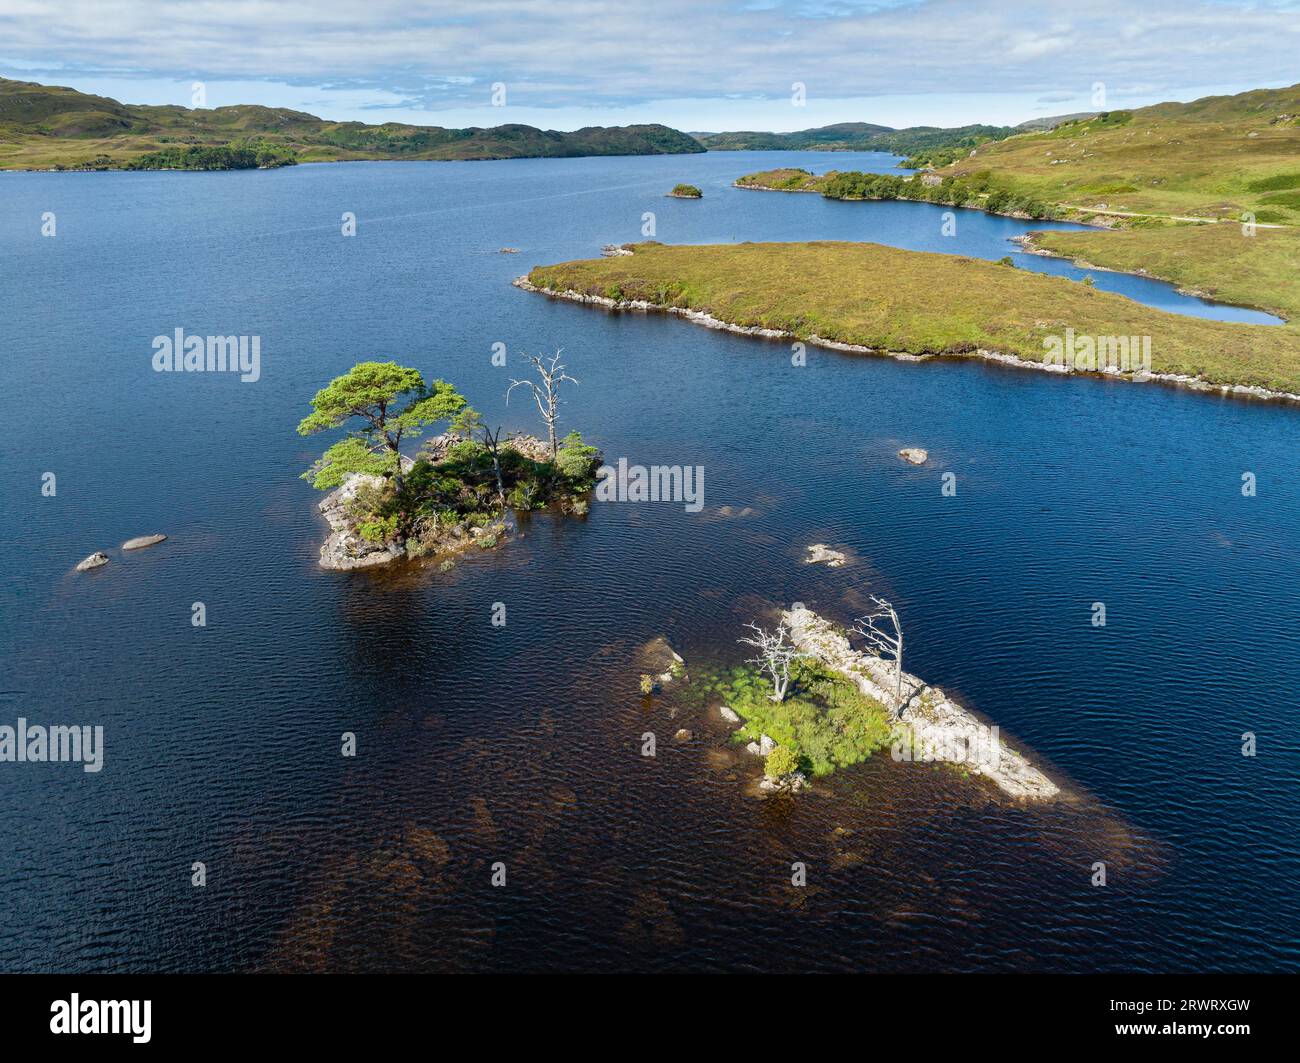 Aerial view of the freshwater loch Loch Assynt with small tree islands, County Sutherland, Scotland, Great Britain Stock Photo